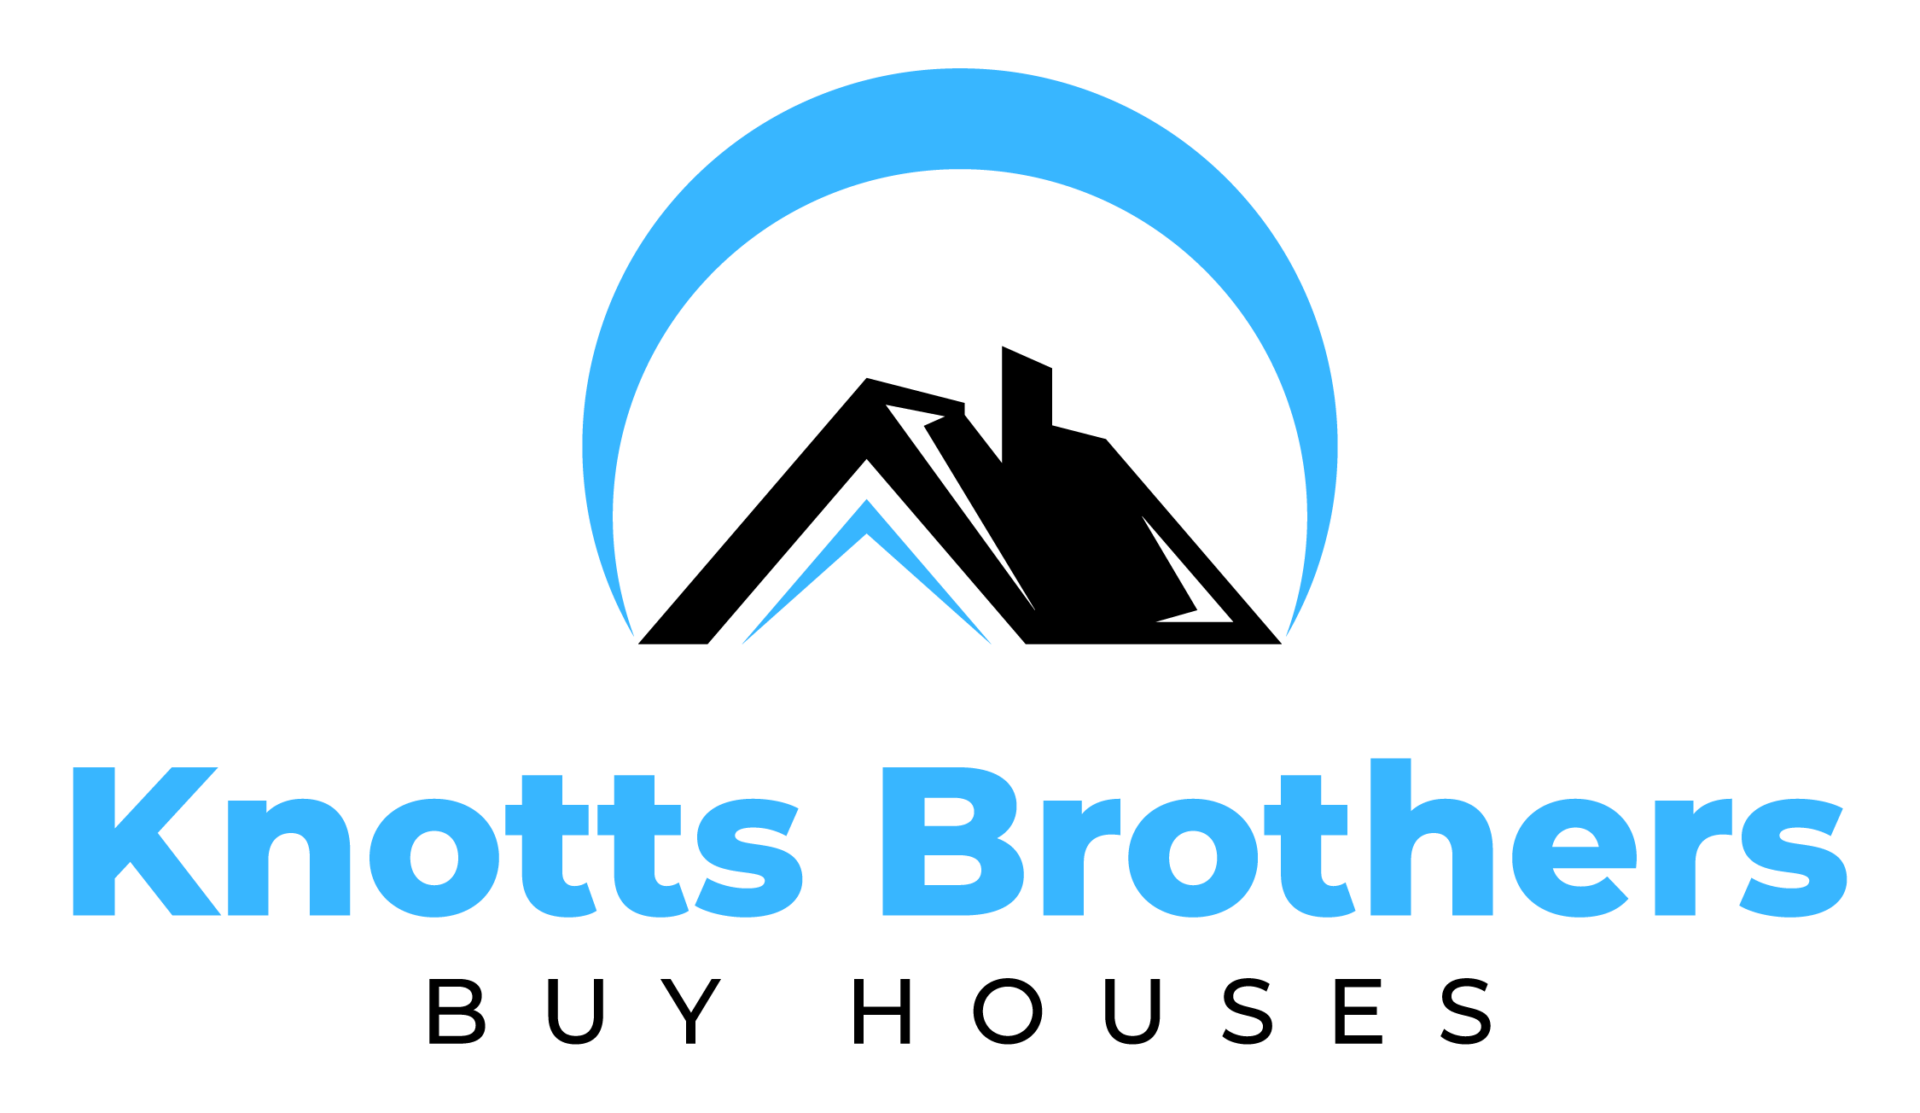 The Knotts Brothers Buy Houses logo